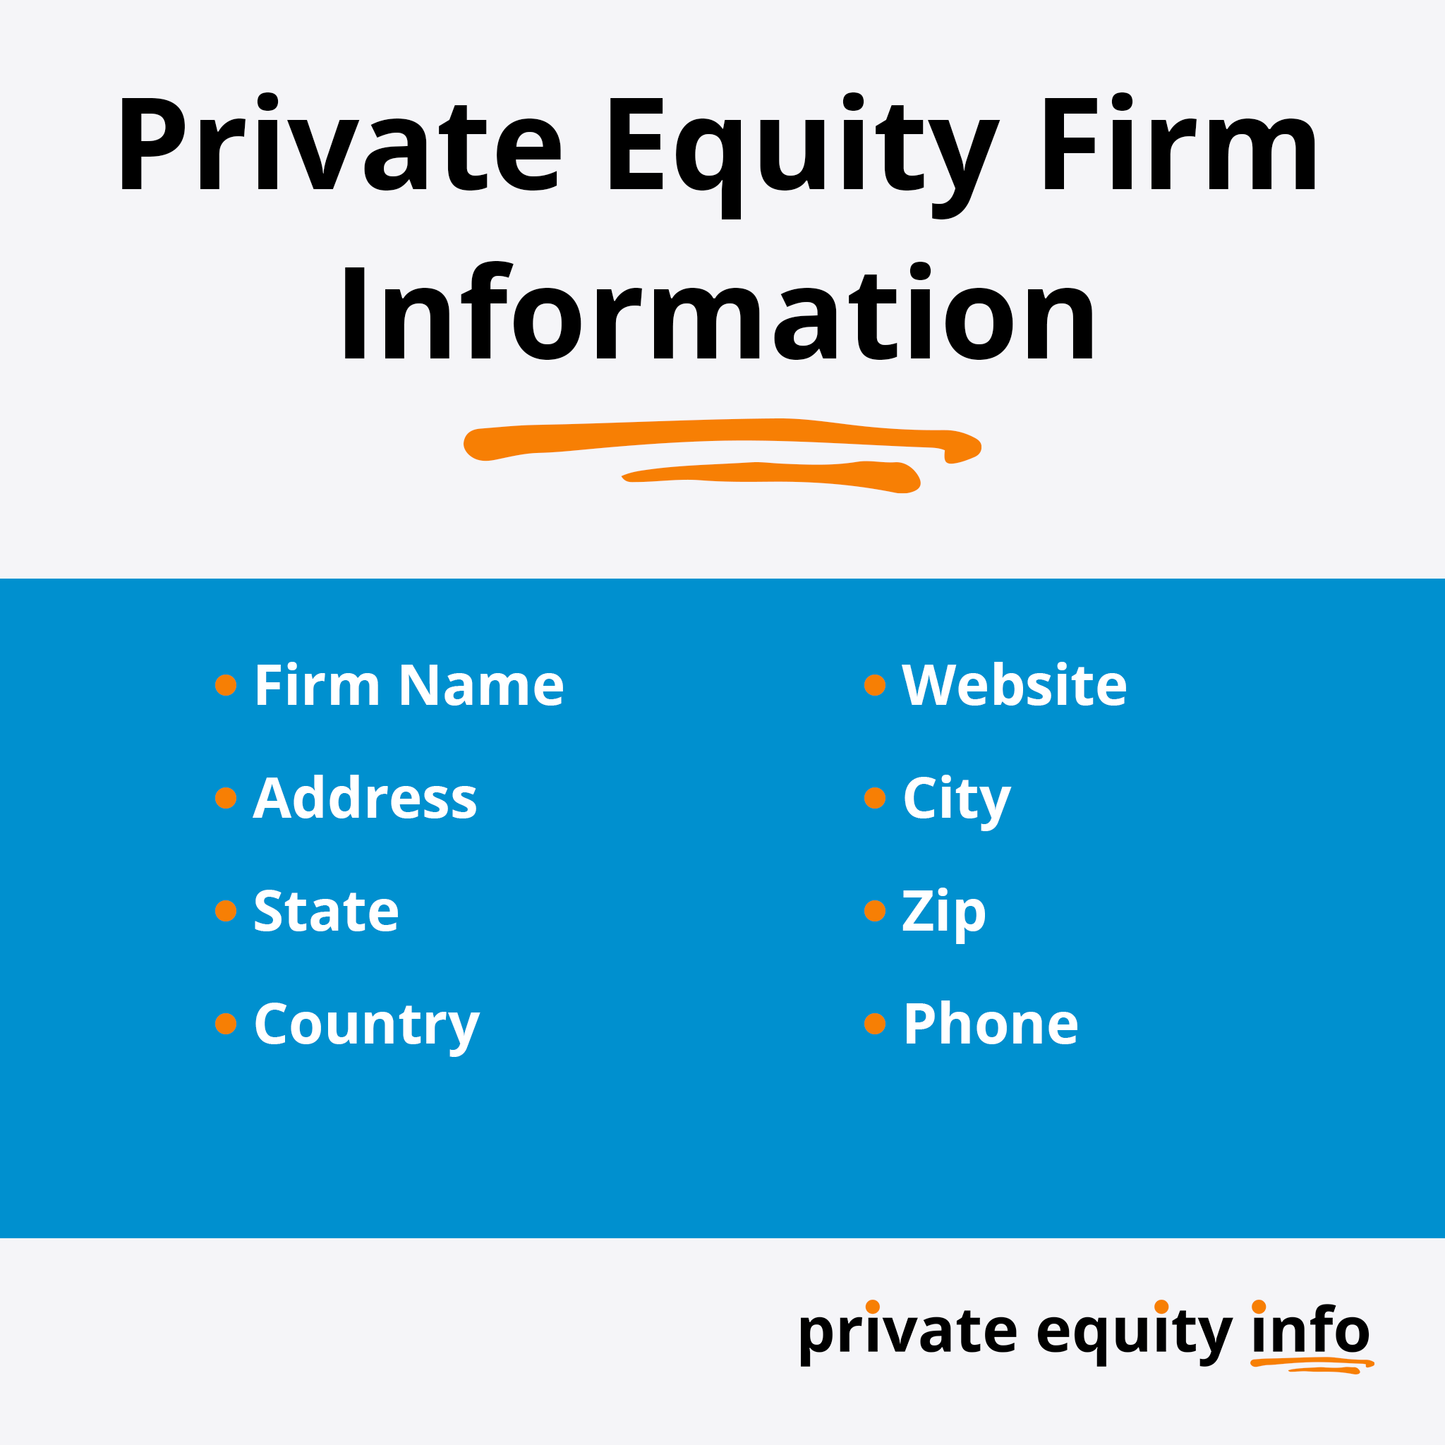 Private Equity Firms in Boston